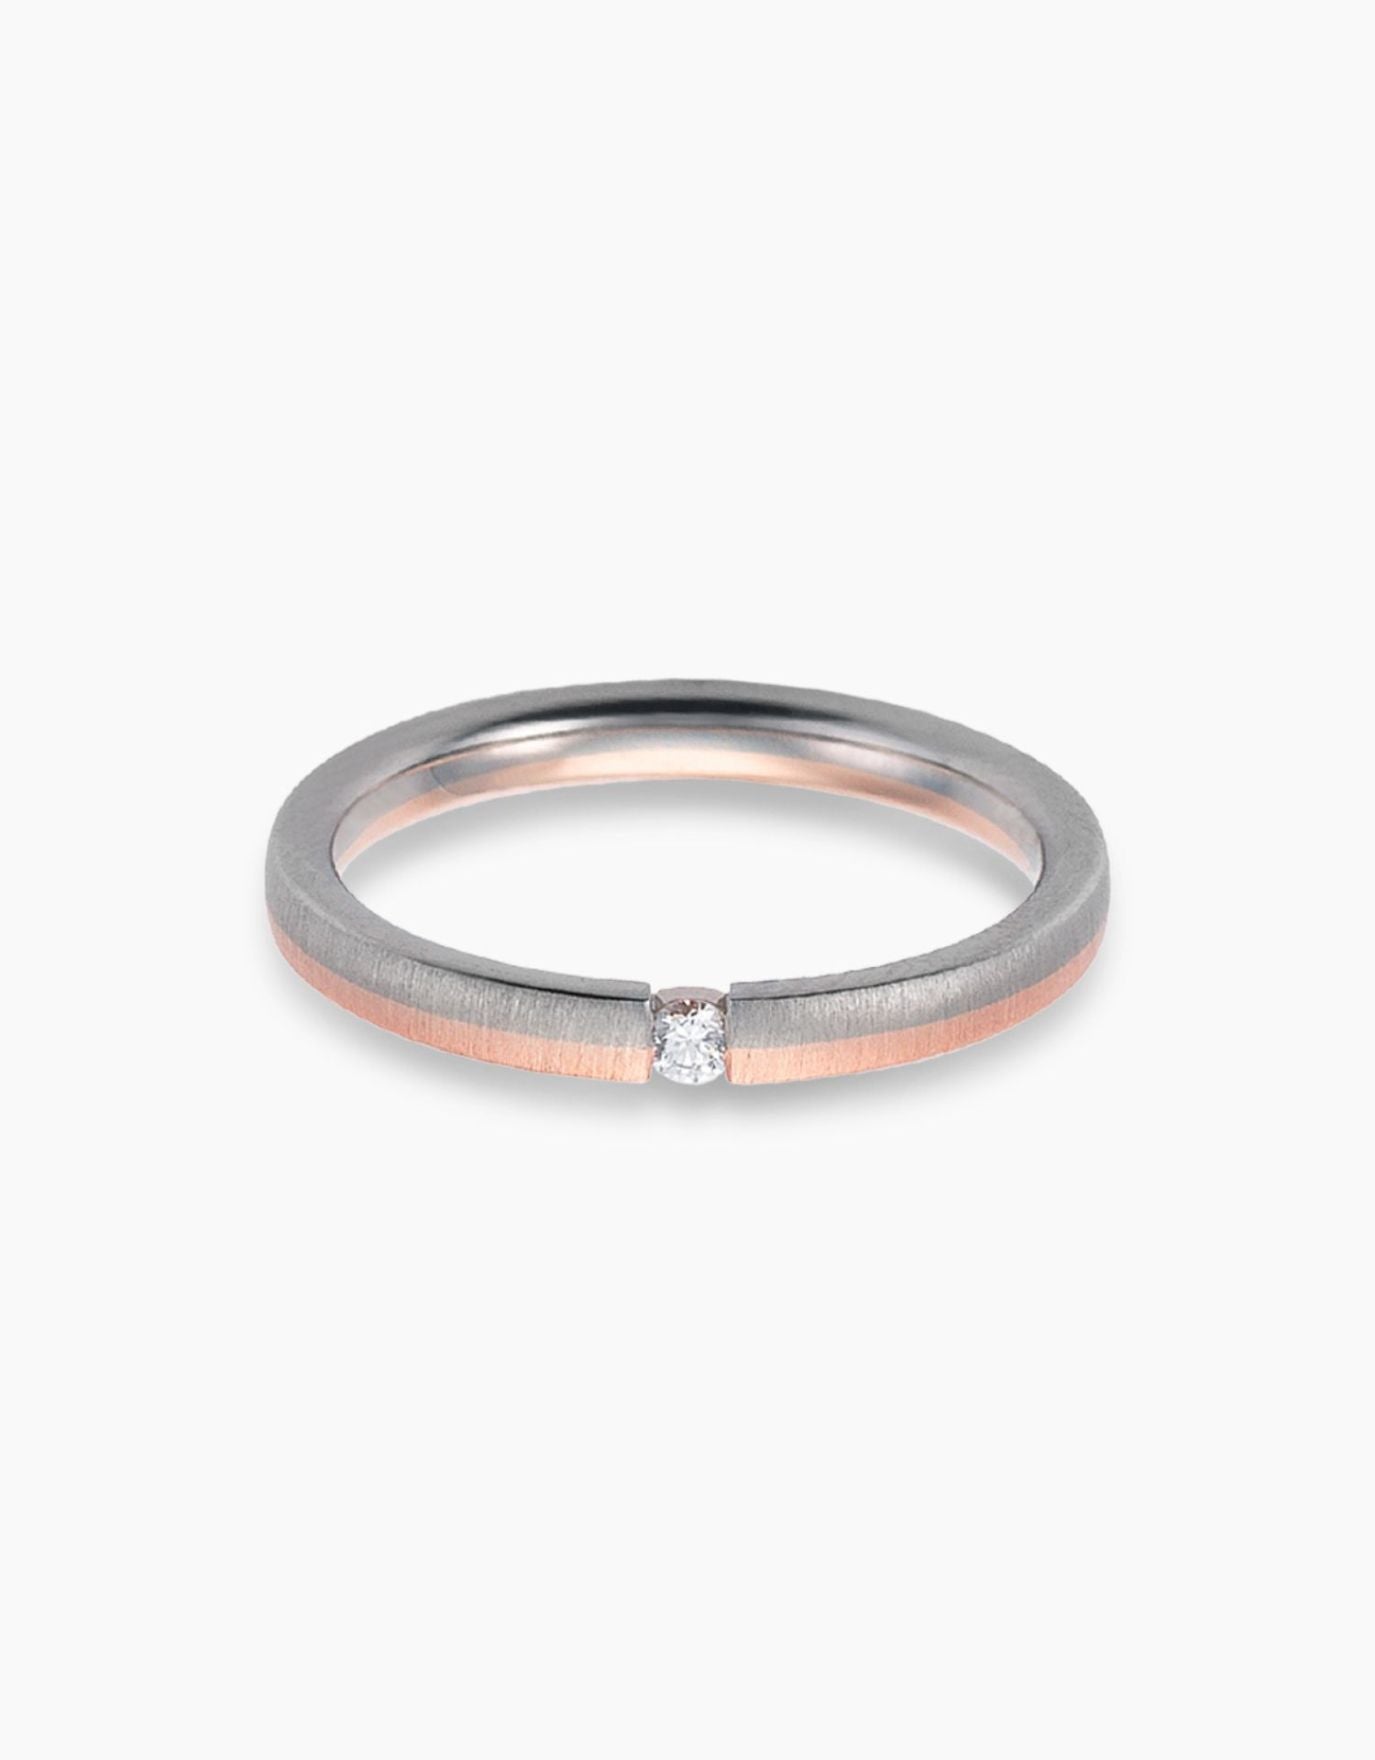 LVC Soleil Mirage Wedding Band in White and Rose Gold with Diamonds